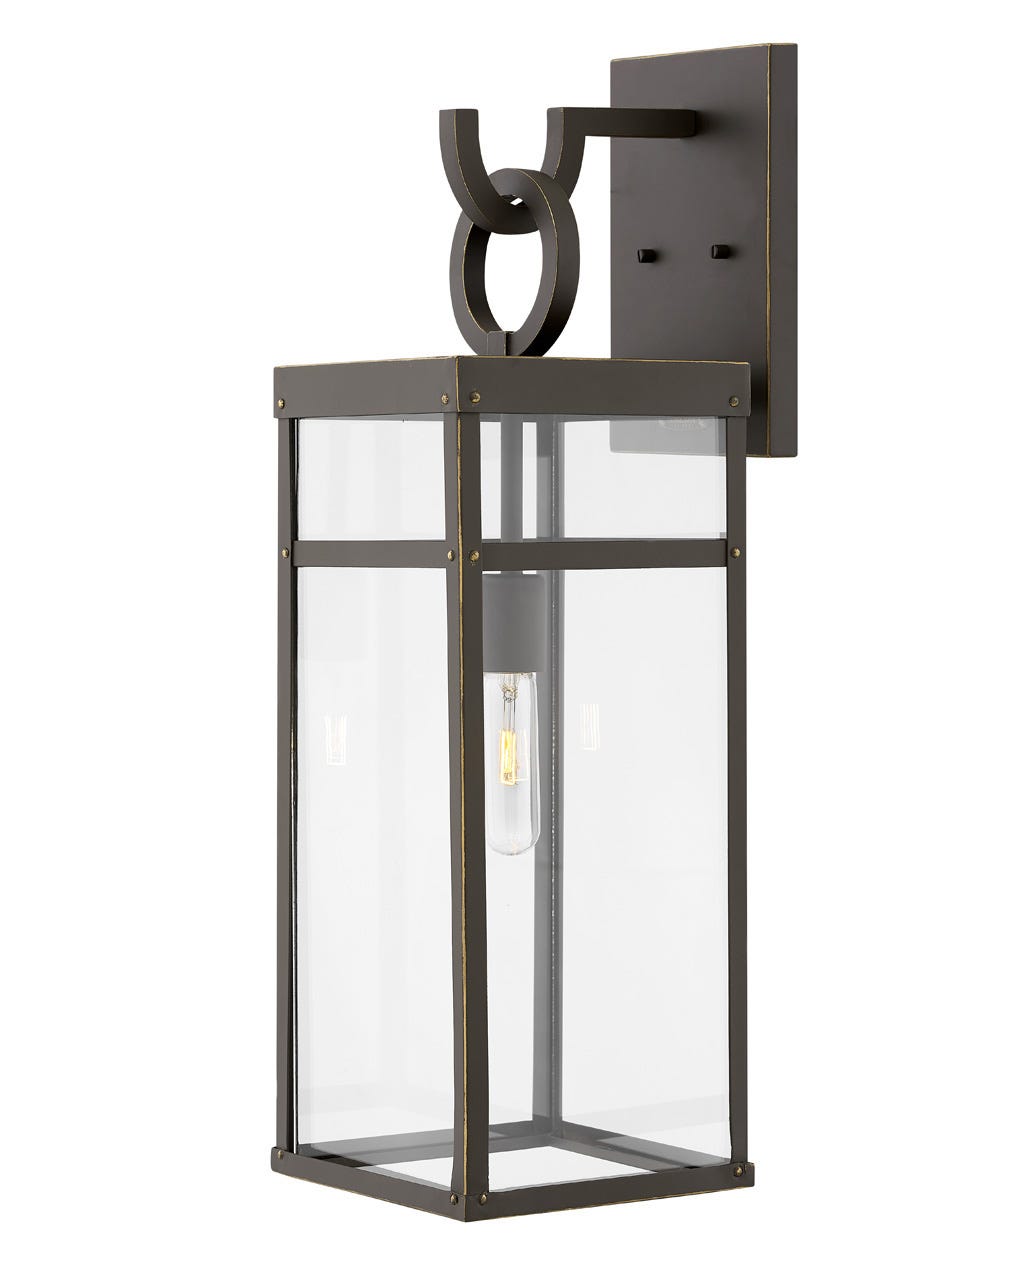 OUTDOOR PORTER Wall Mount Lantern Outdoor l Wall Hinkley Oil Rubbed Bronze 9.25x7.5x25.0 